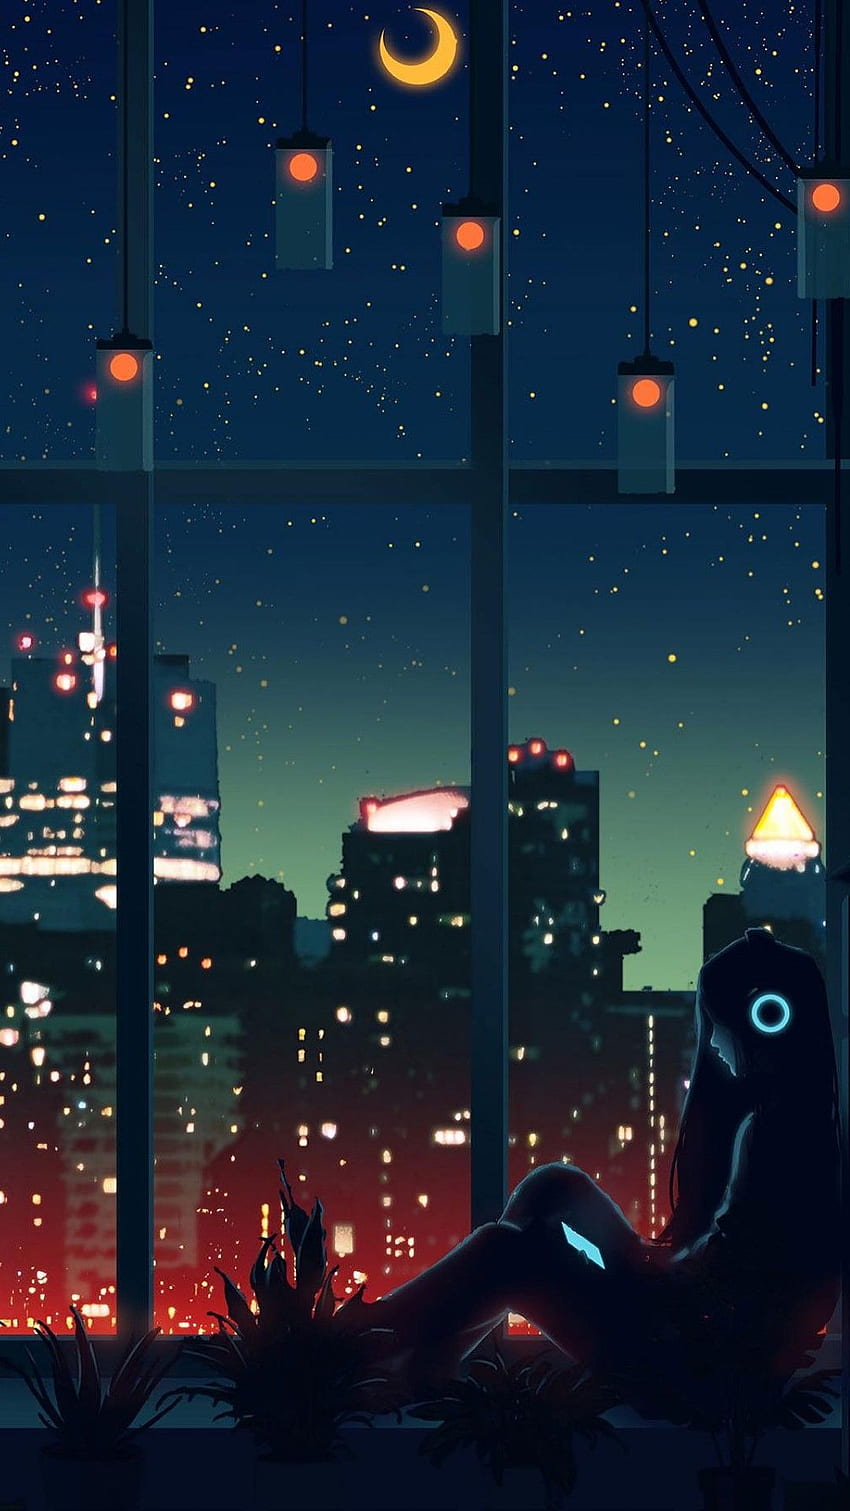 A person sitting in front of windows with city lights - Anime city